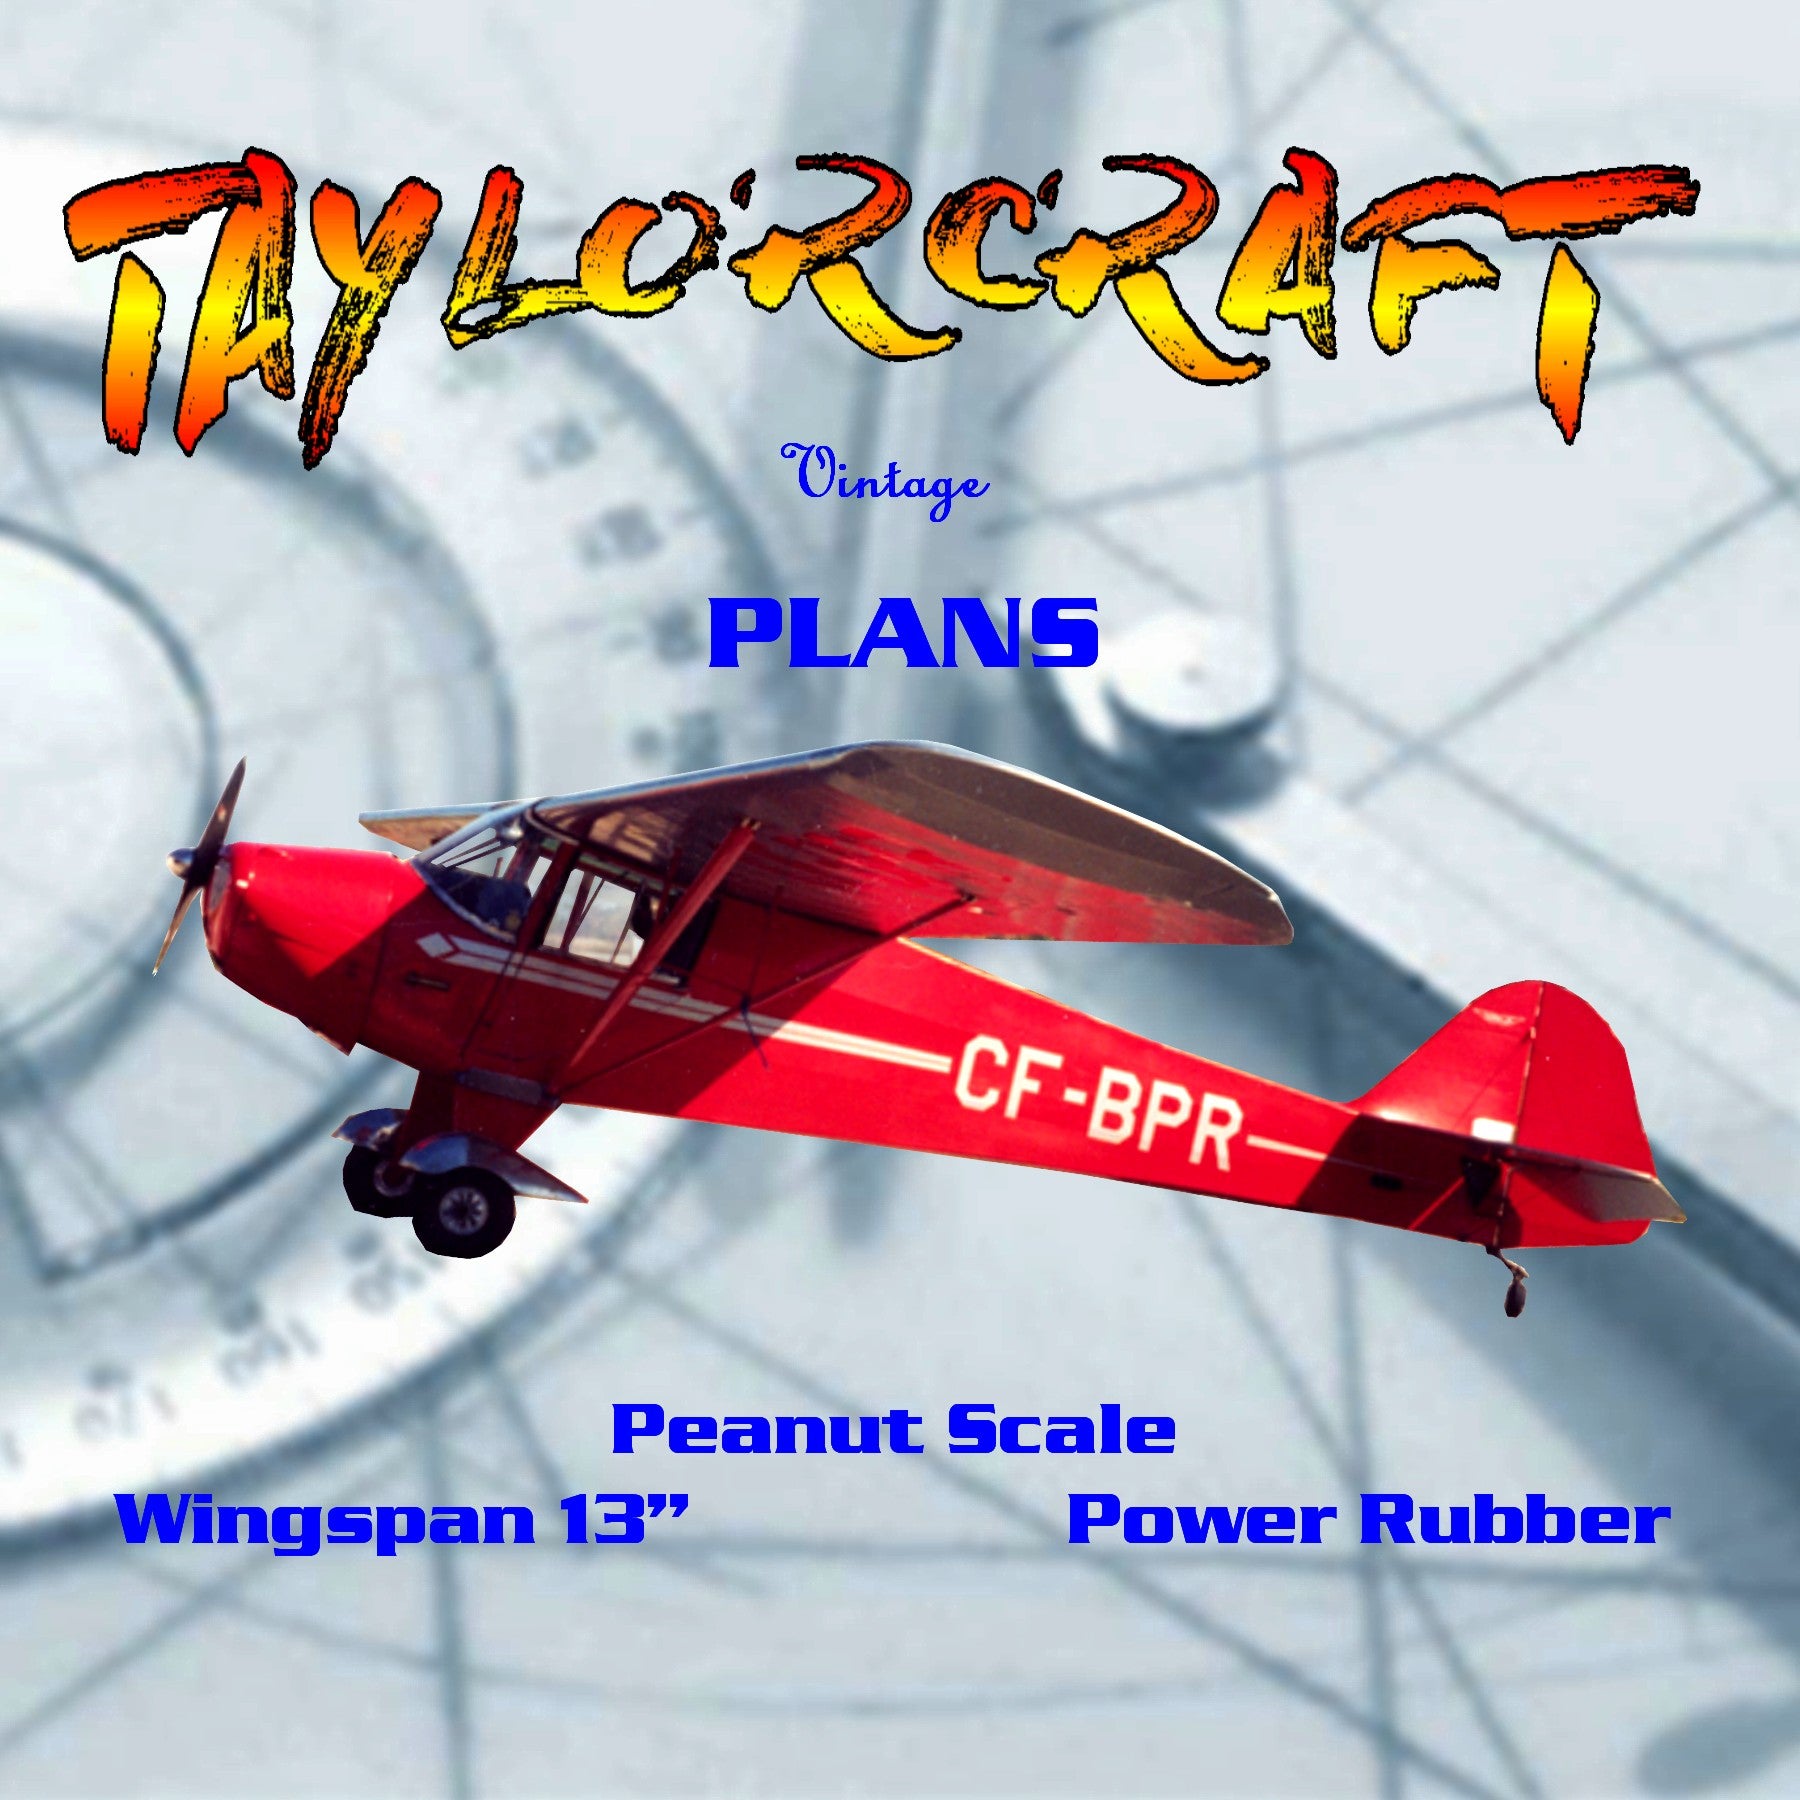 full size printed plans peanut scale "taylorcraft" compete with the laceys and fikes